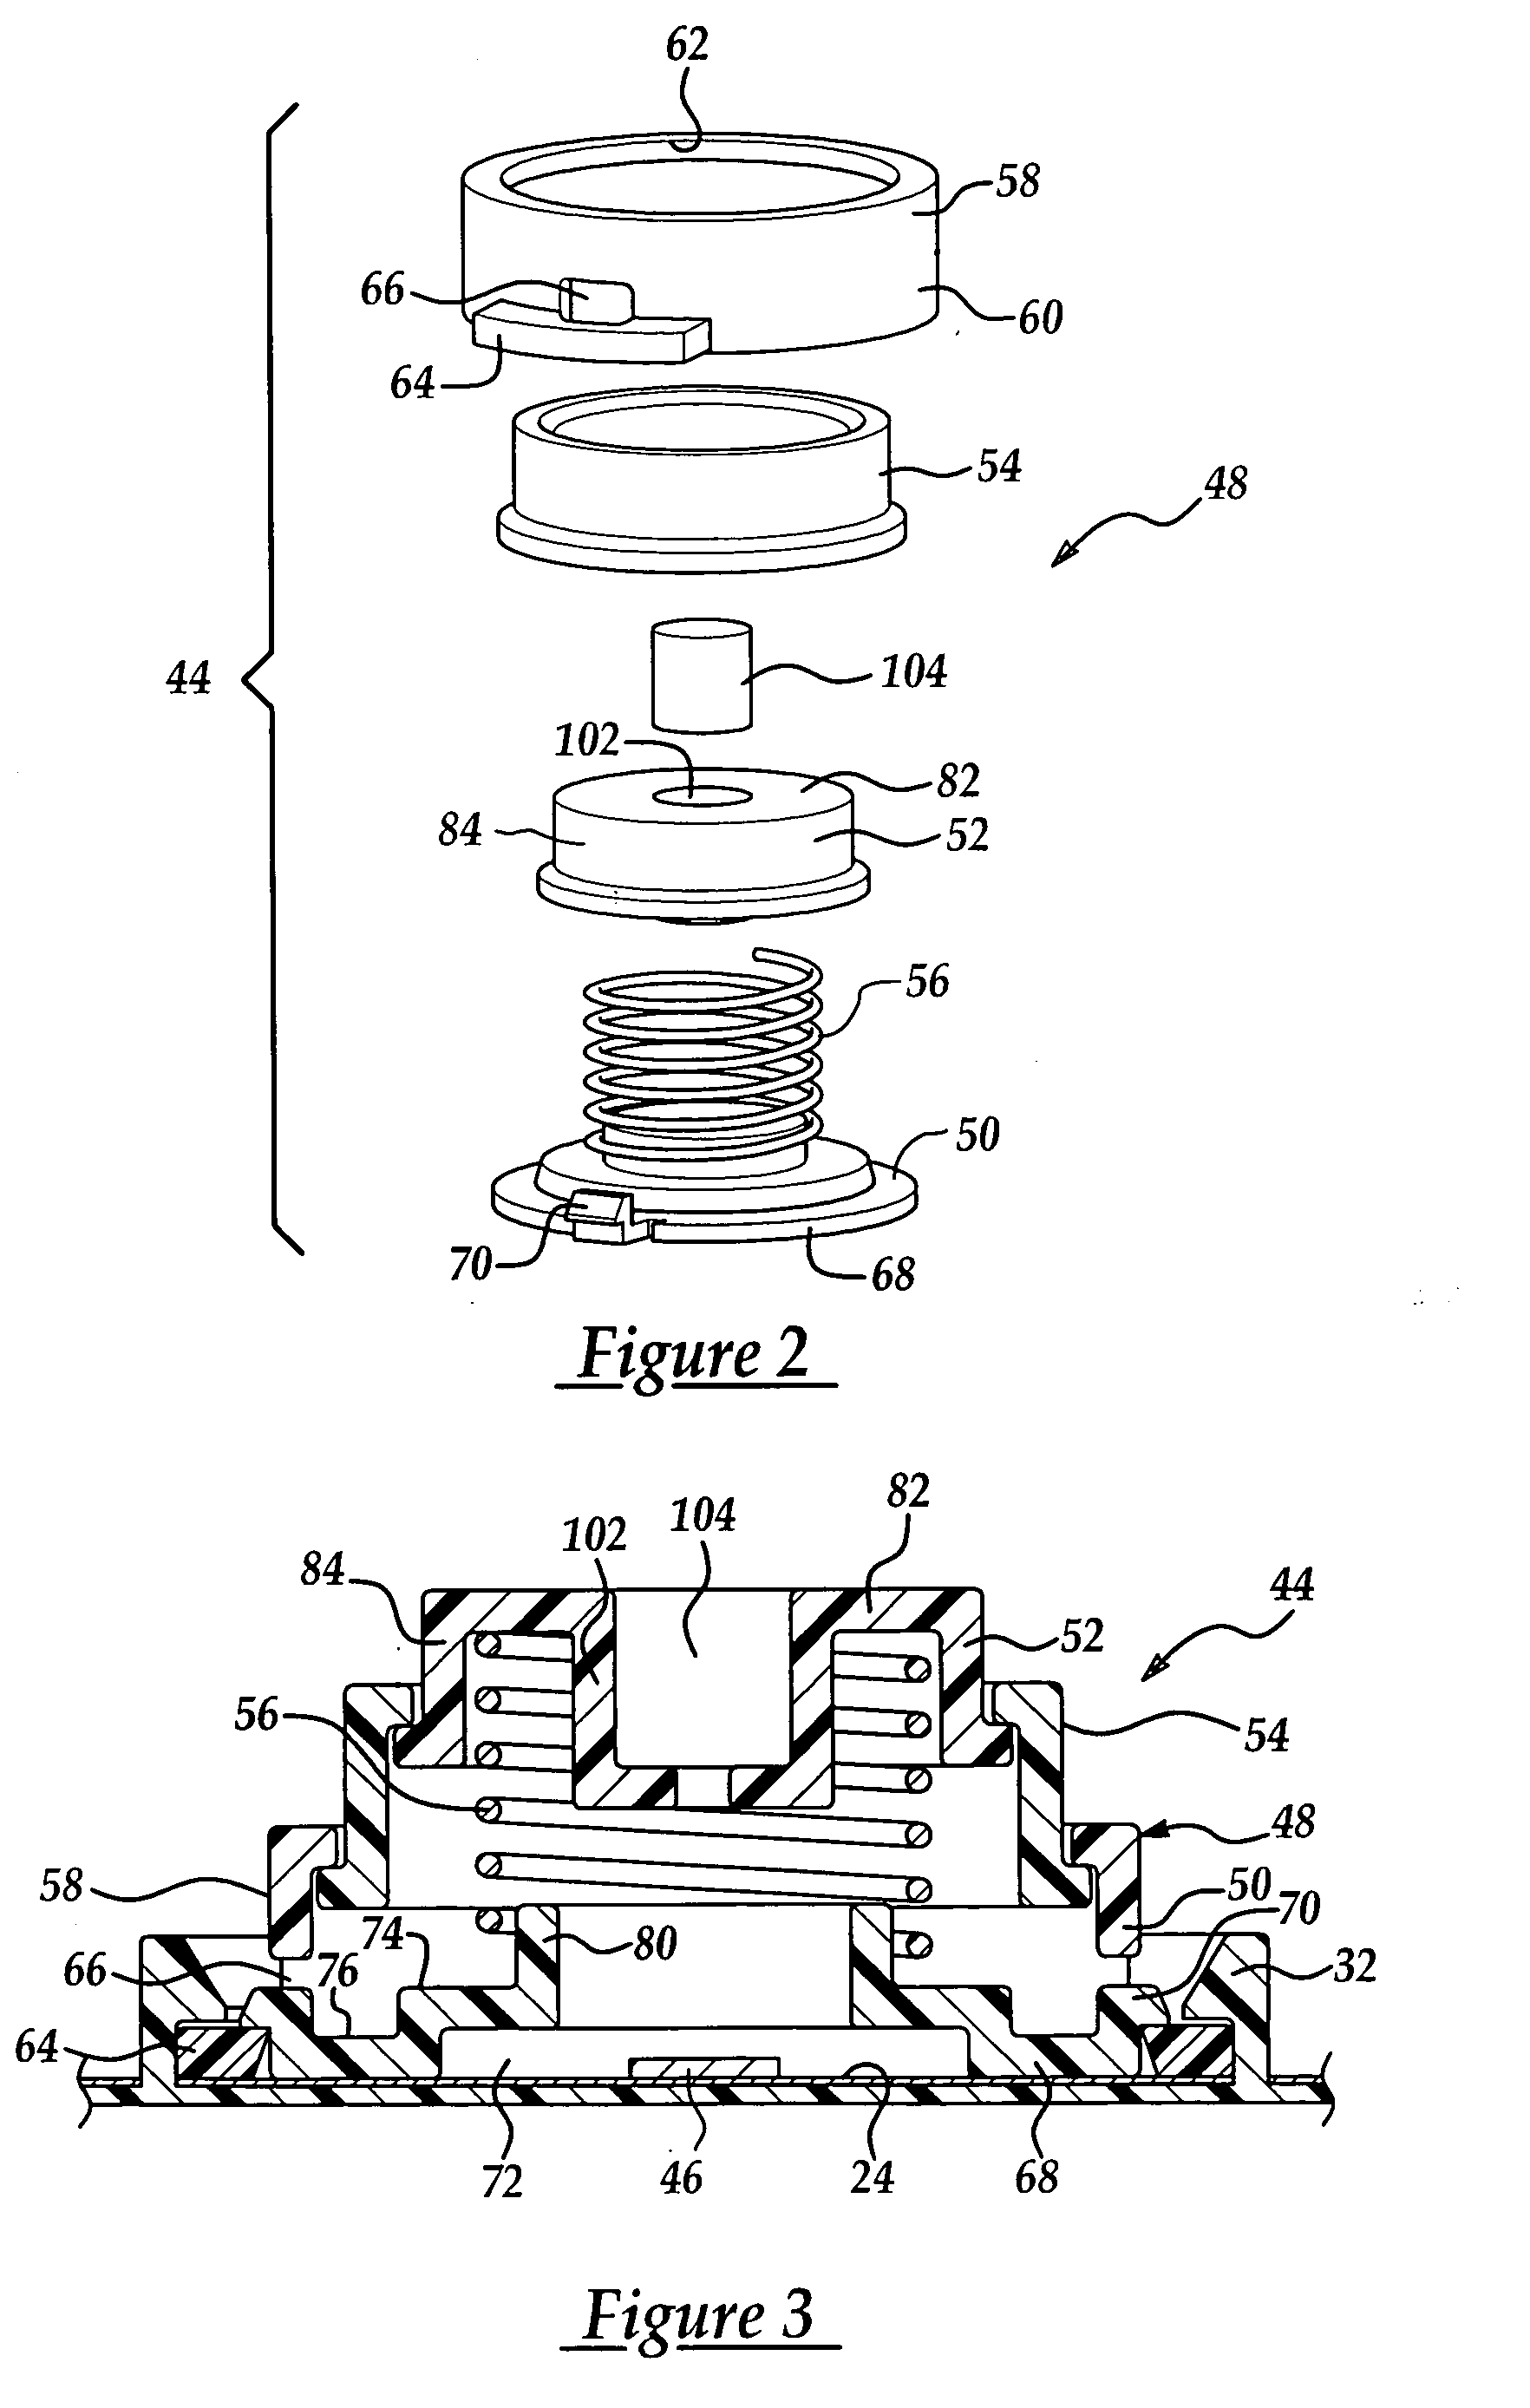 Method of determining an equivalent value for a failed sensor in a vehicle seat having an occupancy sensing system